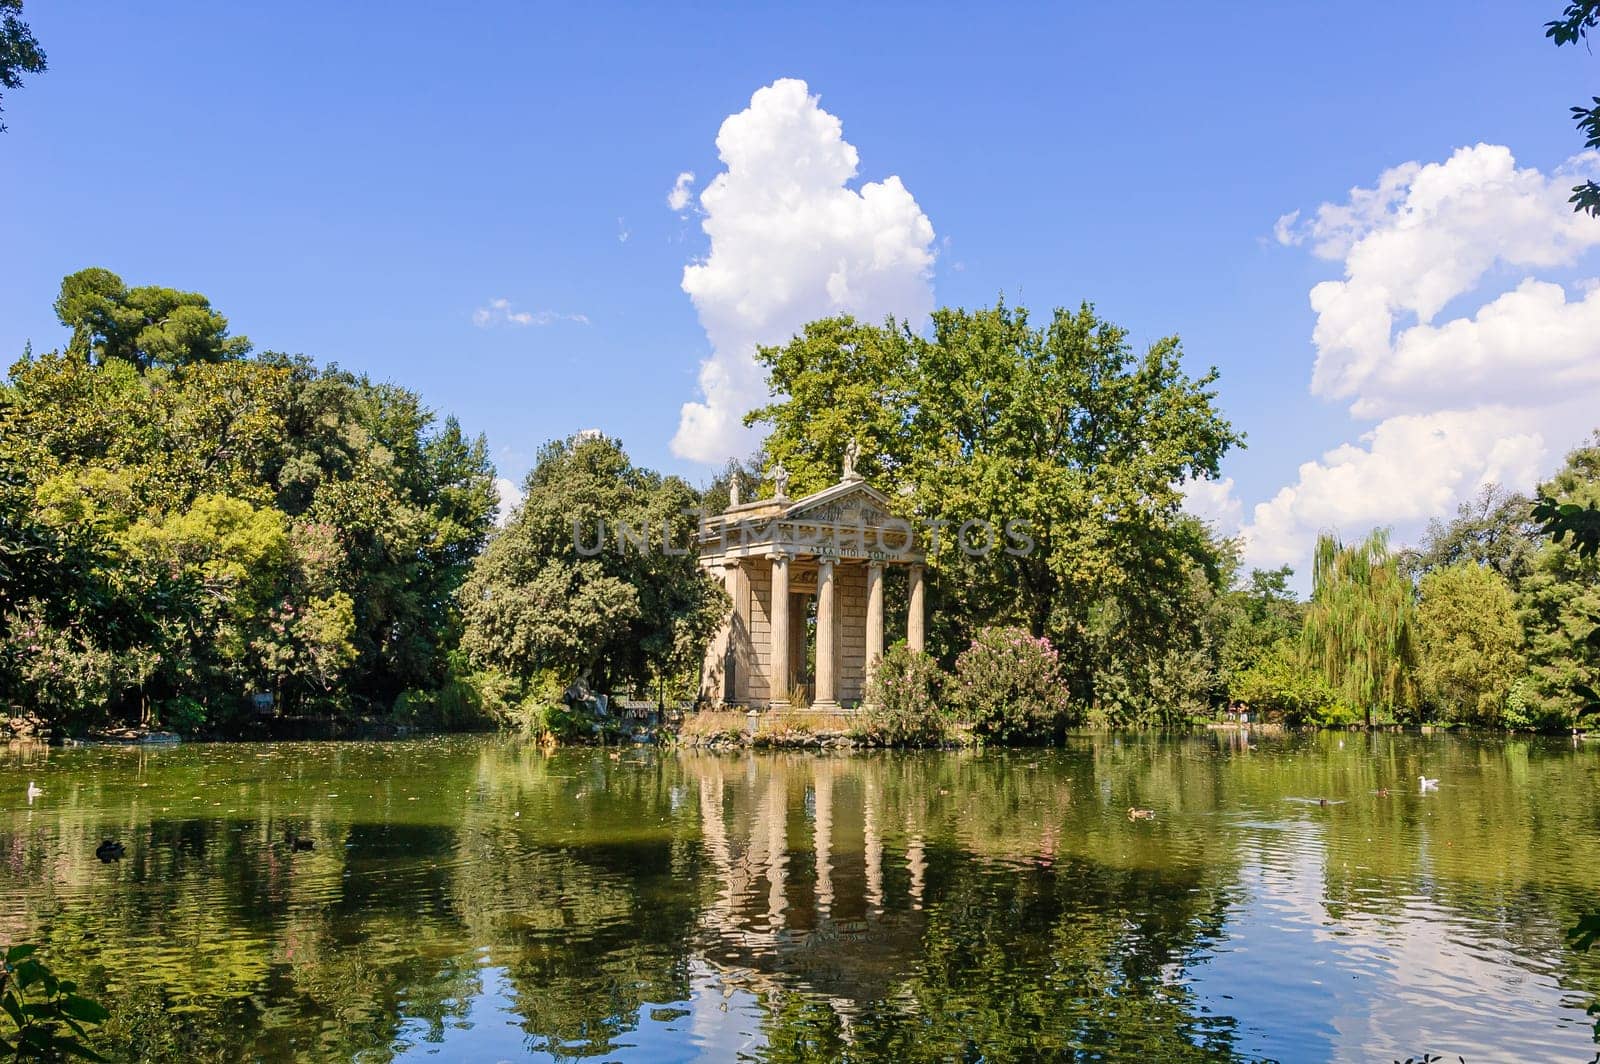 Temple of Aesculapius on the lake of Villa Borghese, Rome by ivanmoreno